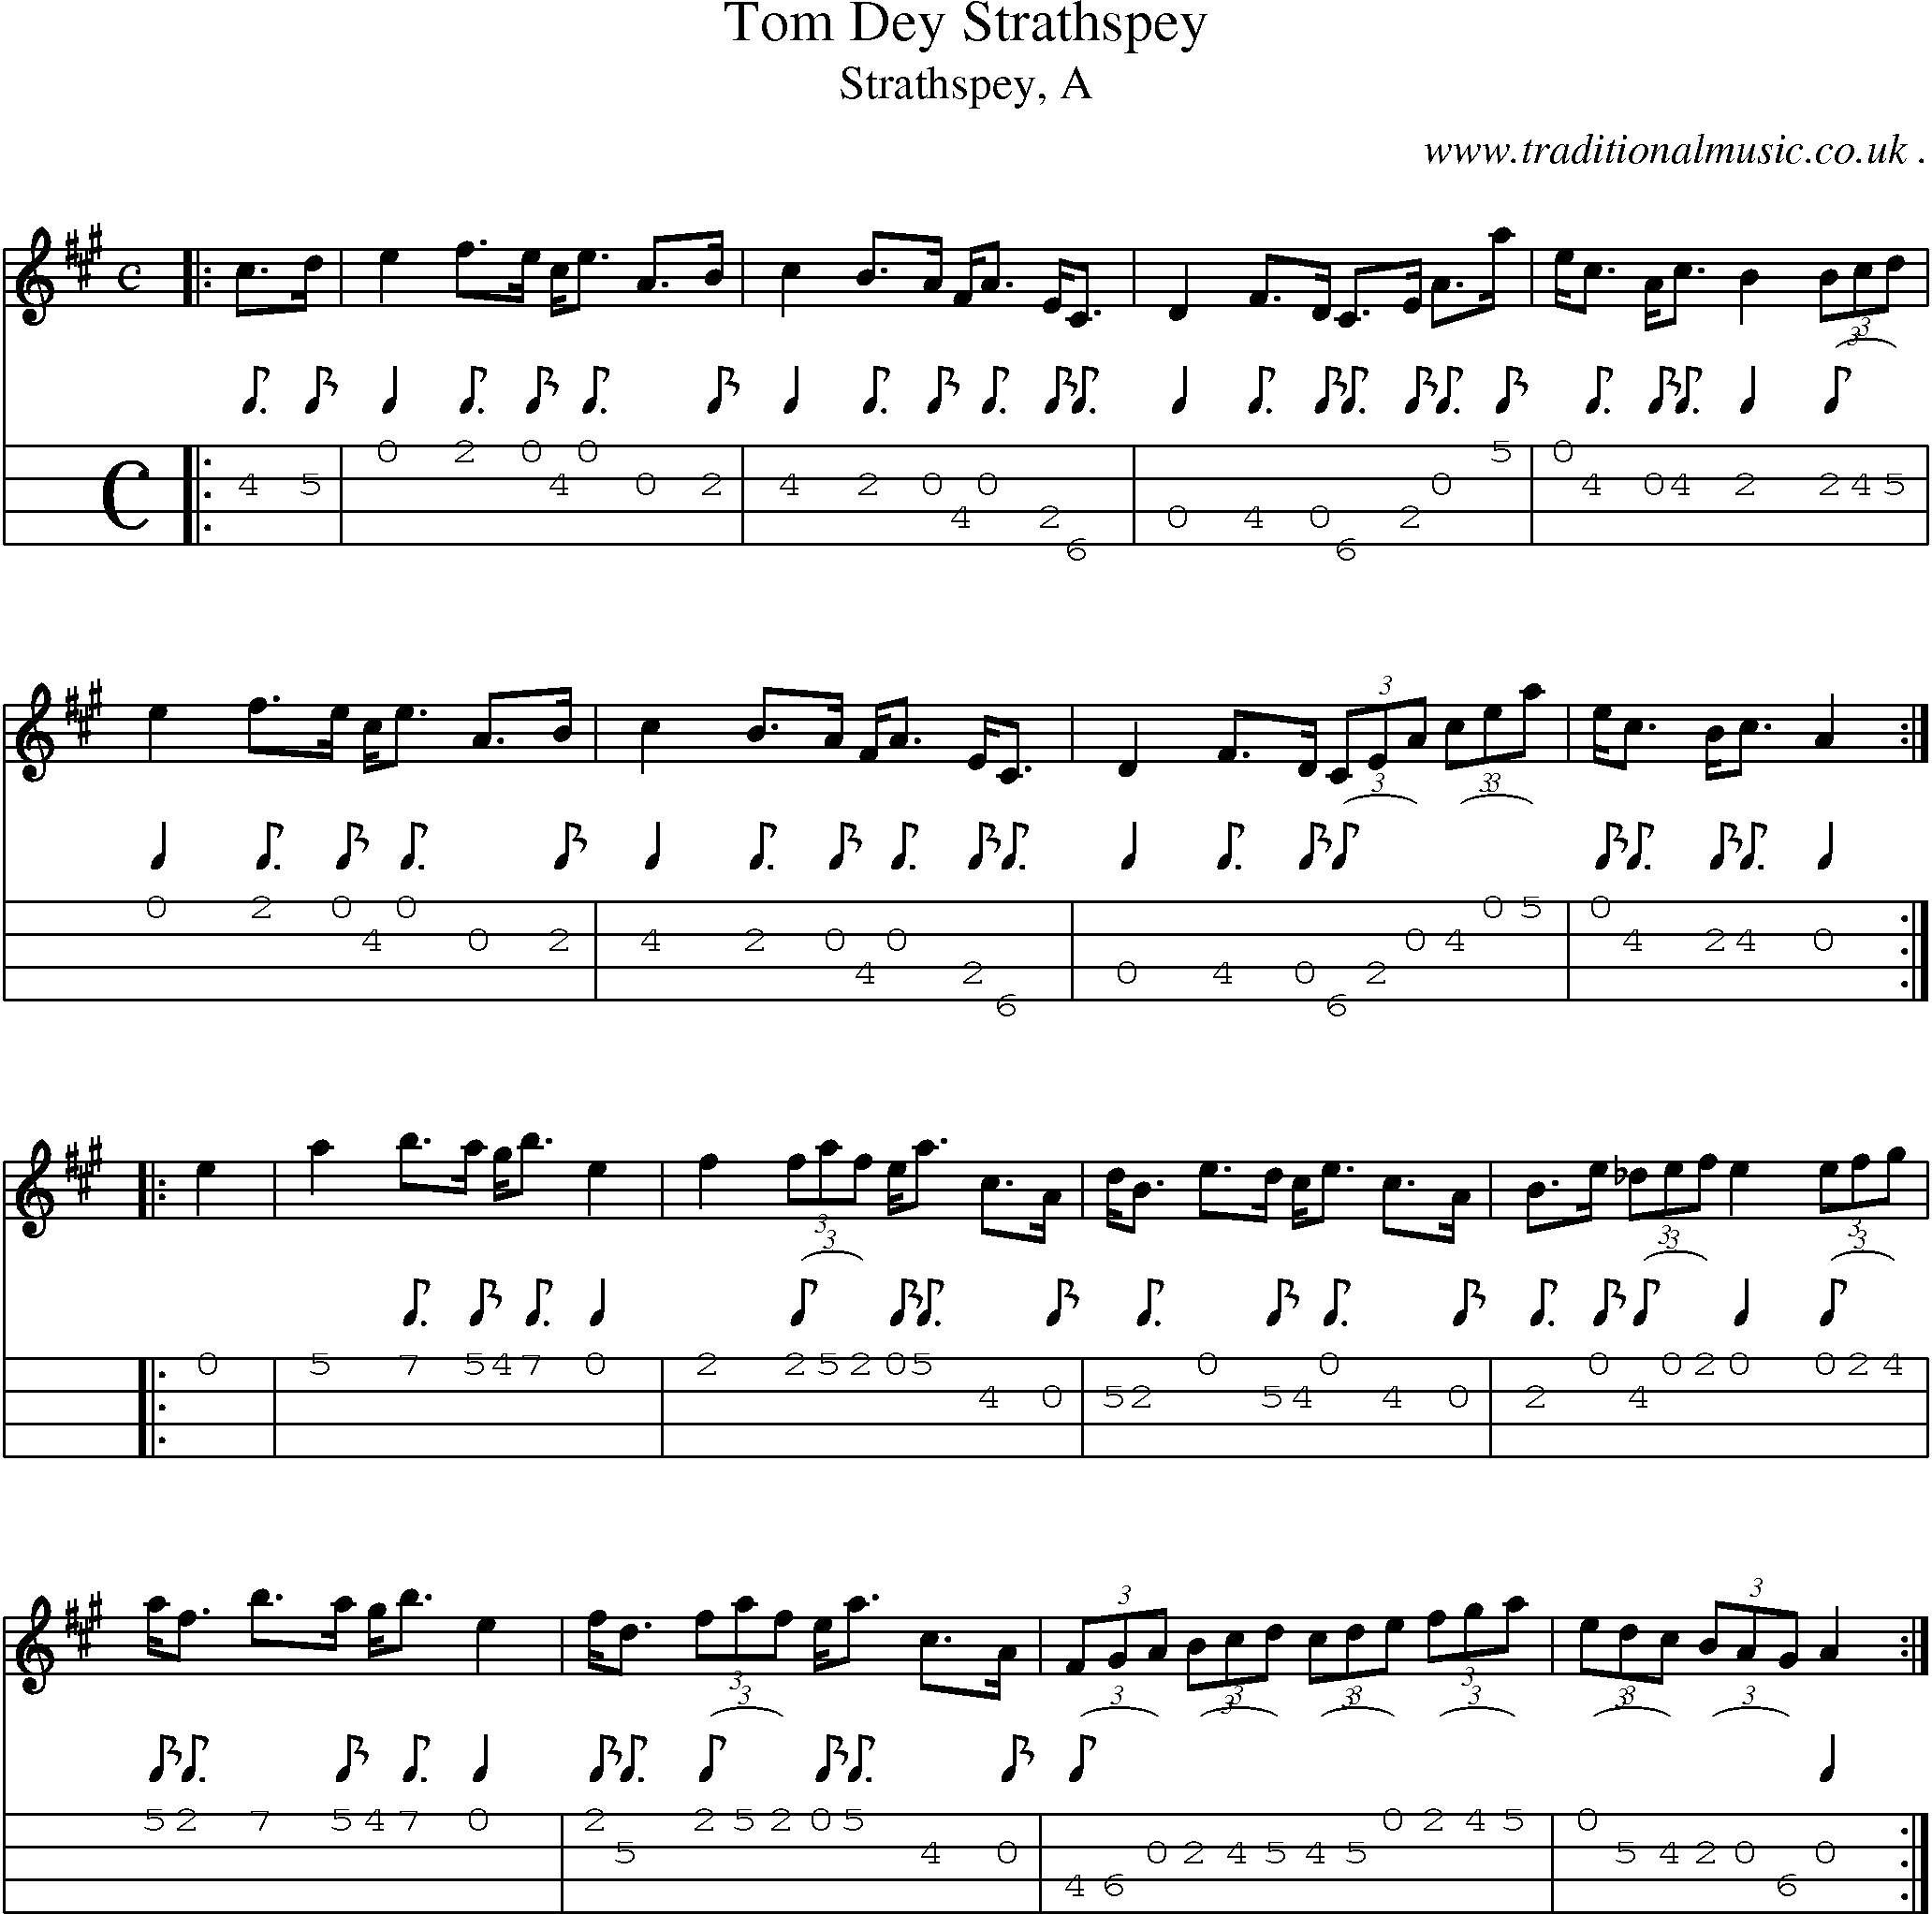 Sheet-music  score, Chords and Mandolin Tabs for Tom Dey Strathspey